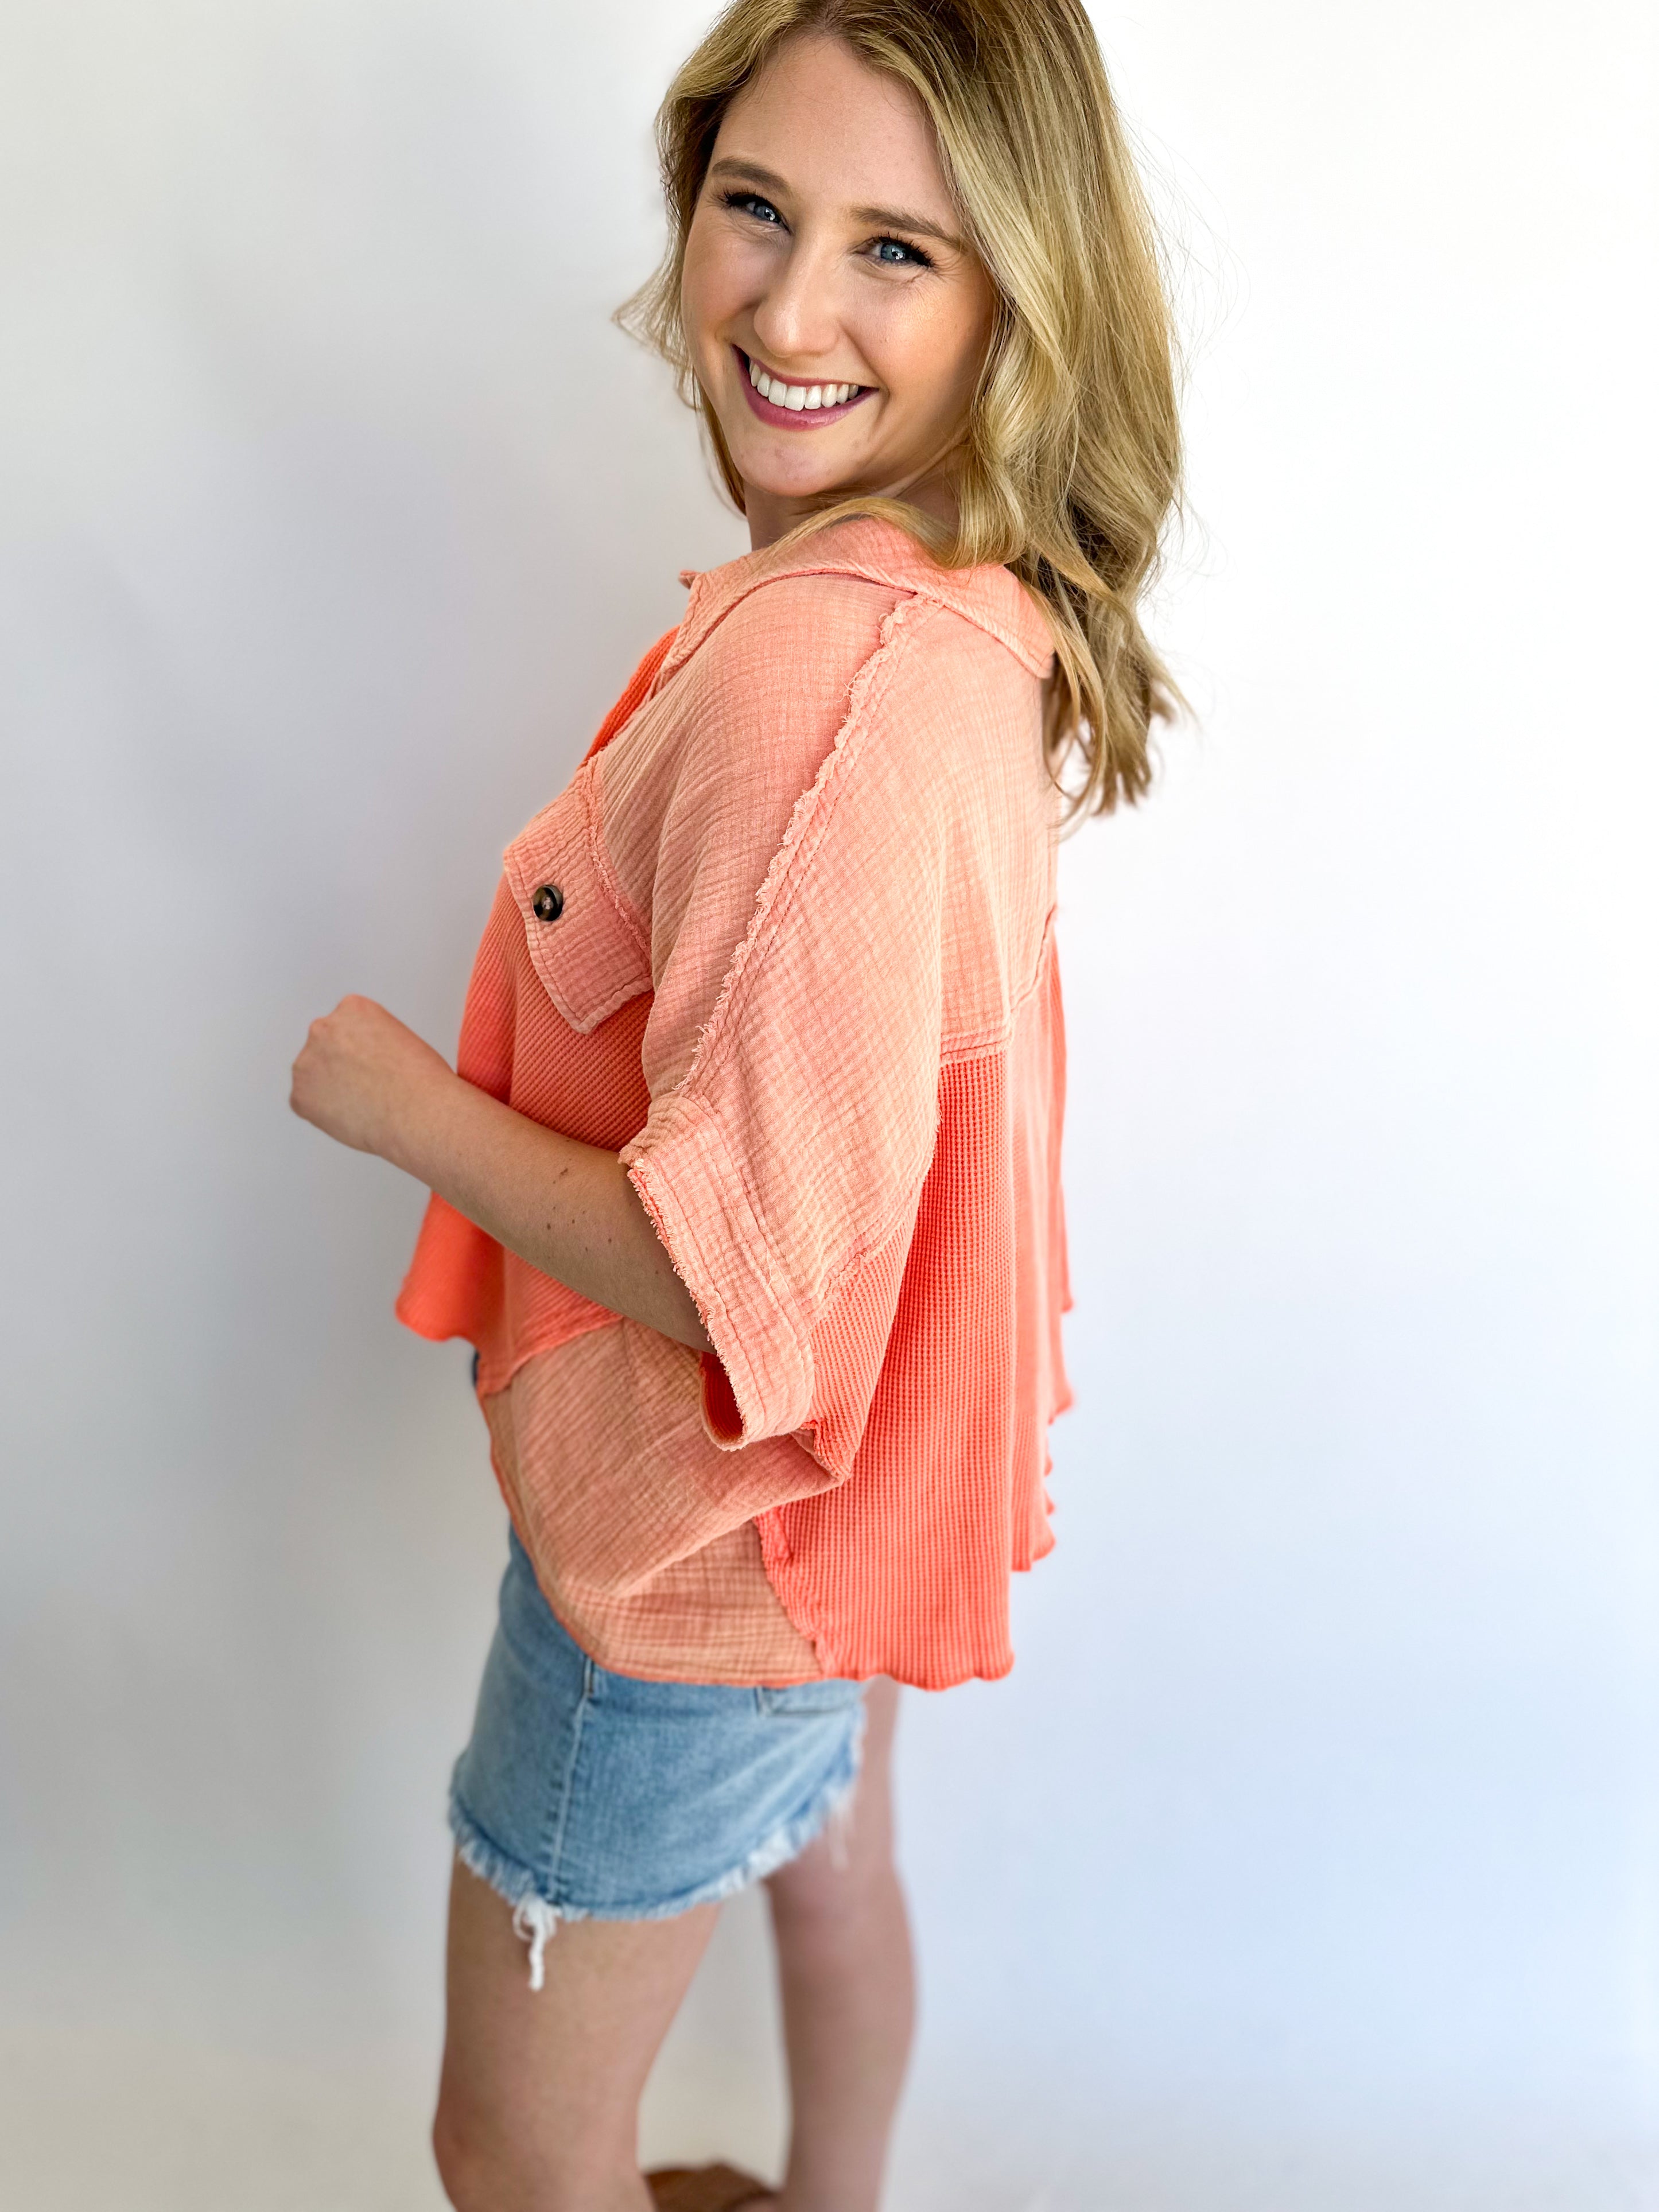 Peach Mixed Media Tee-200 Fashion Blouses-FANTASTIC FAWN-July & June Women's Fashion Boutique Located in San Antonio, Texas